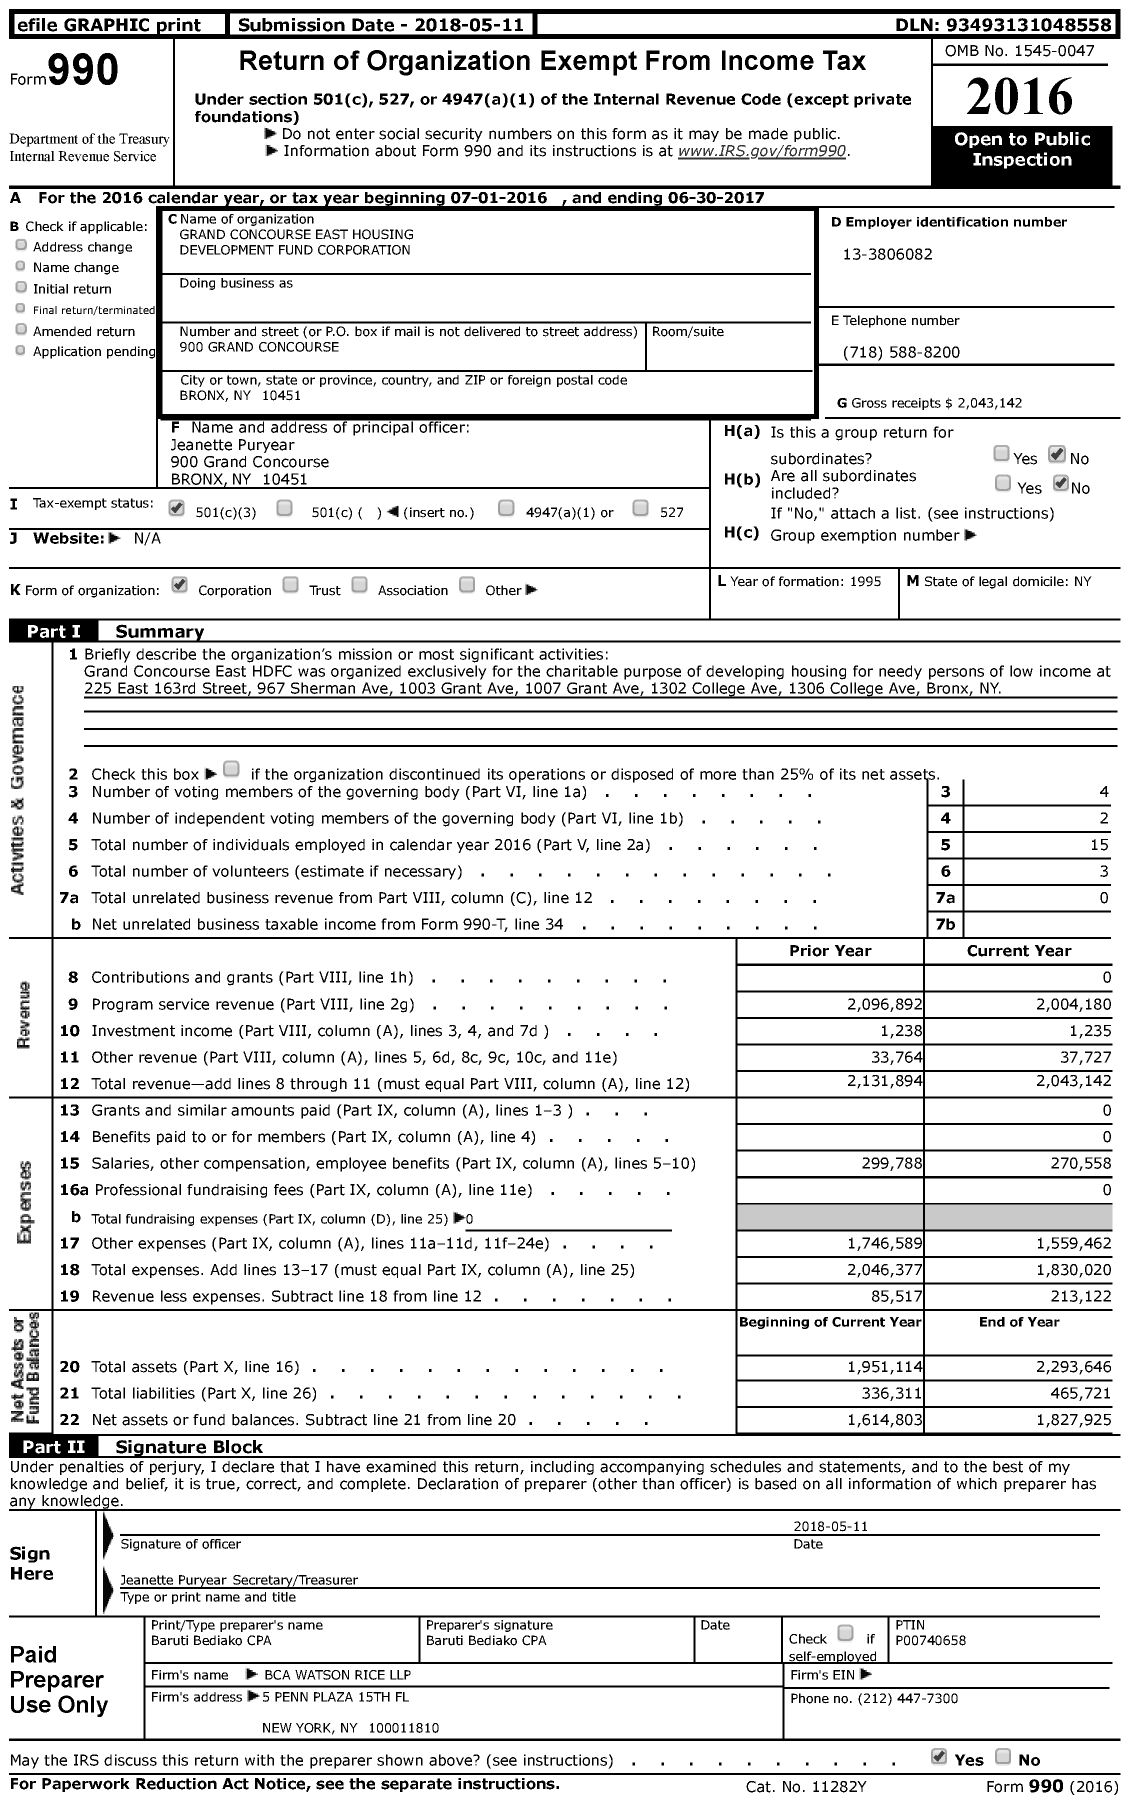 Image of first page of 2016 Form 990 for Grand Concourse East Housing Development Fund Corporation